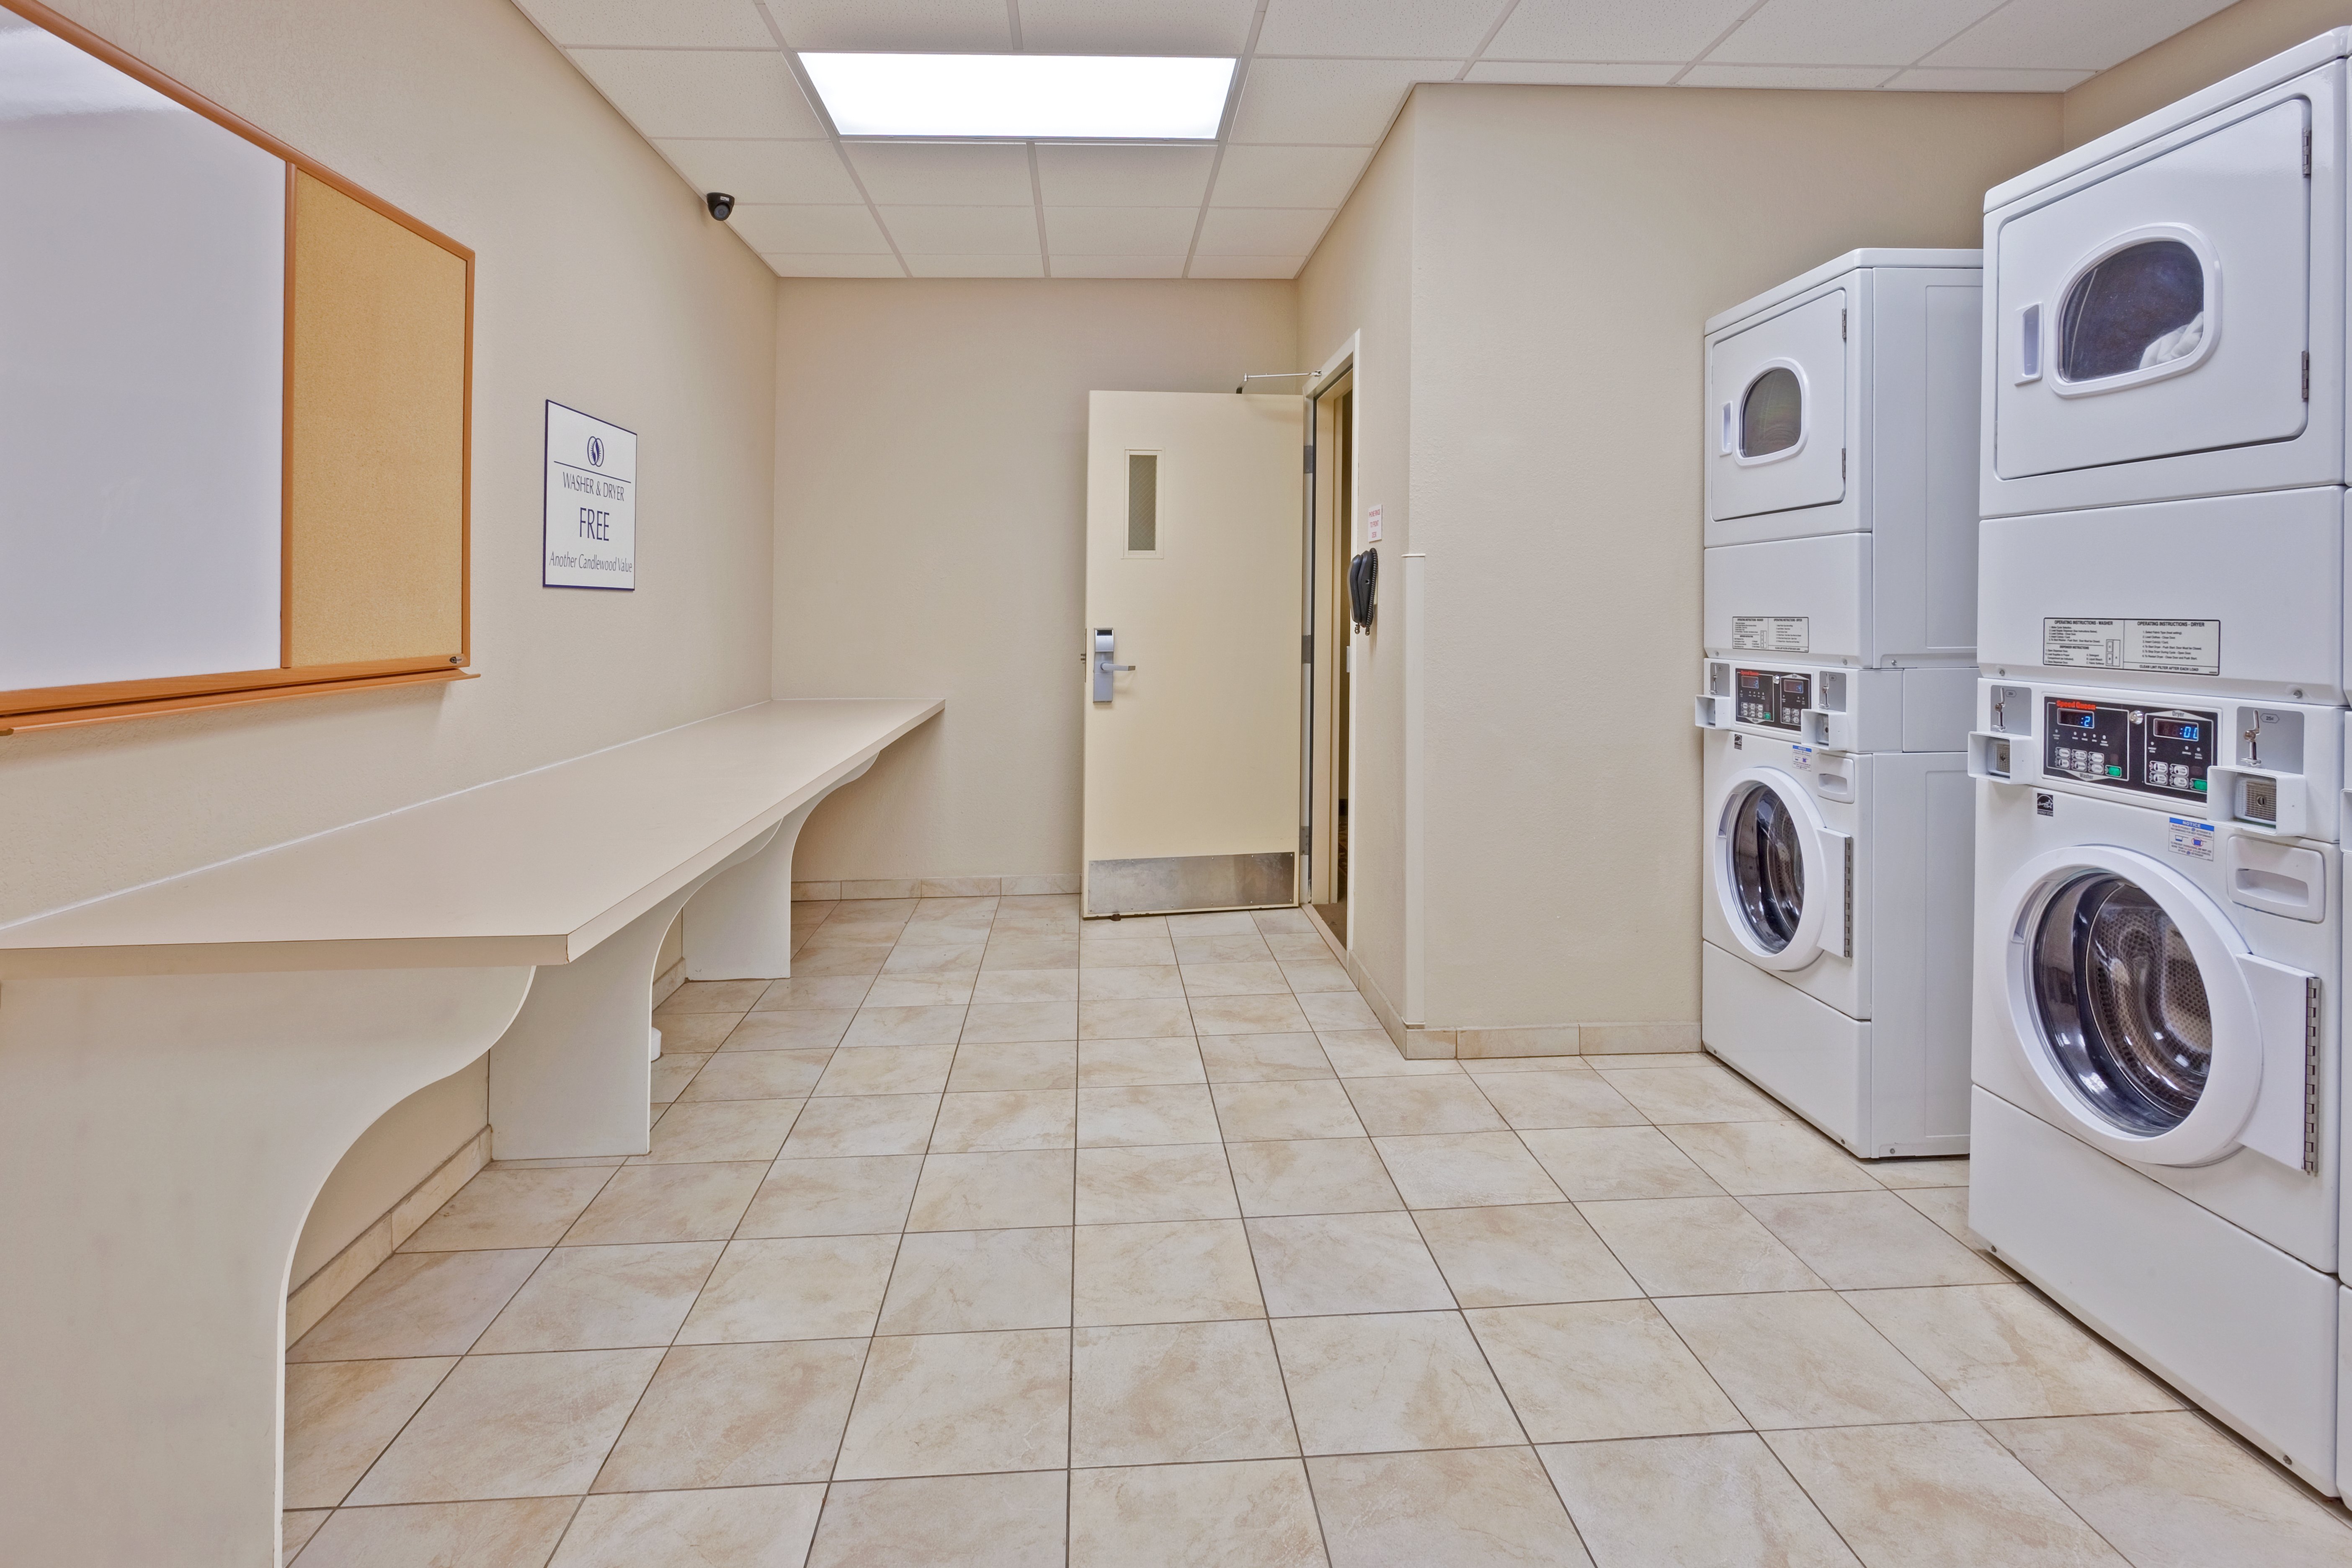 Laundry service is available 24/7 for guests convenience.